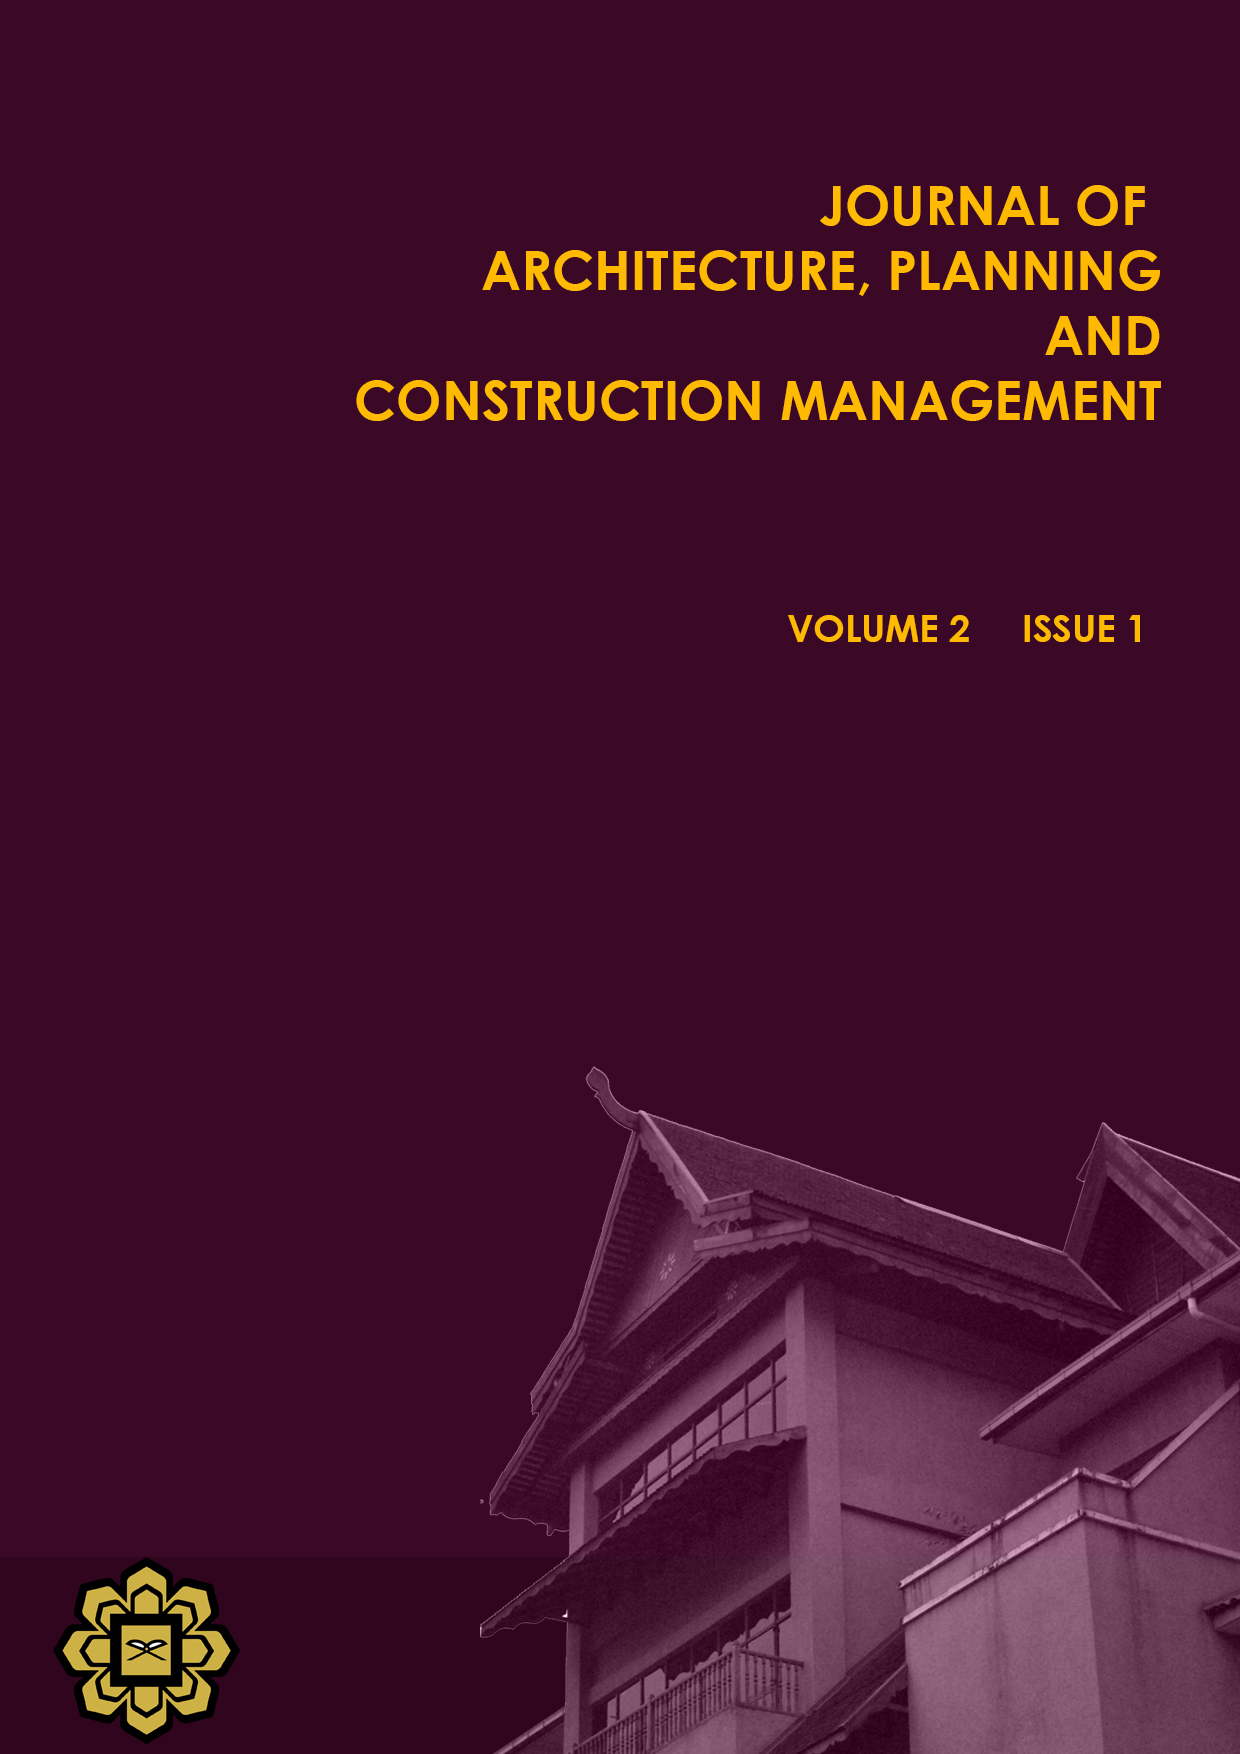 					View Vol. 2 No. 1 (2012): Journal of Architecture, Planning and Construction Management (JAPCM) 
				